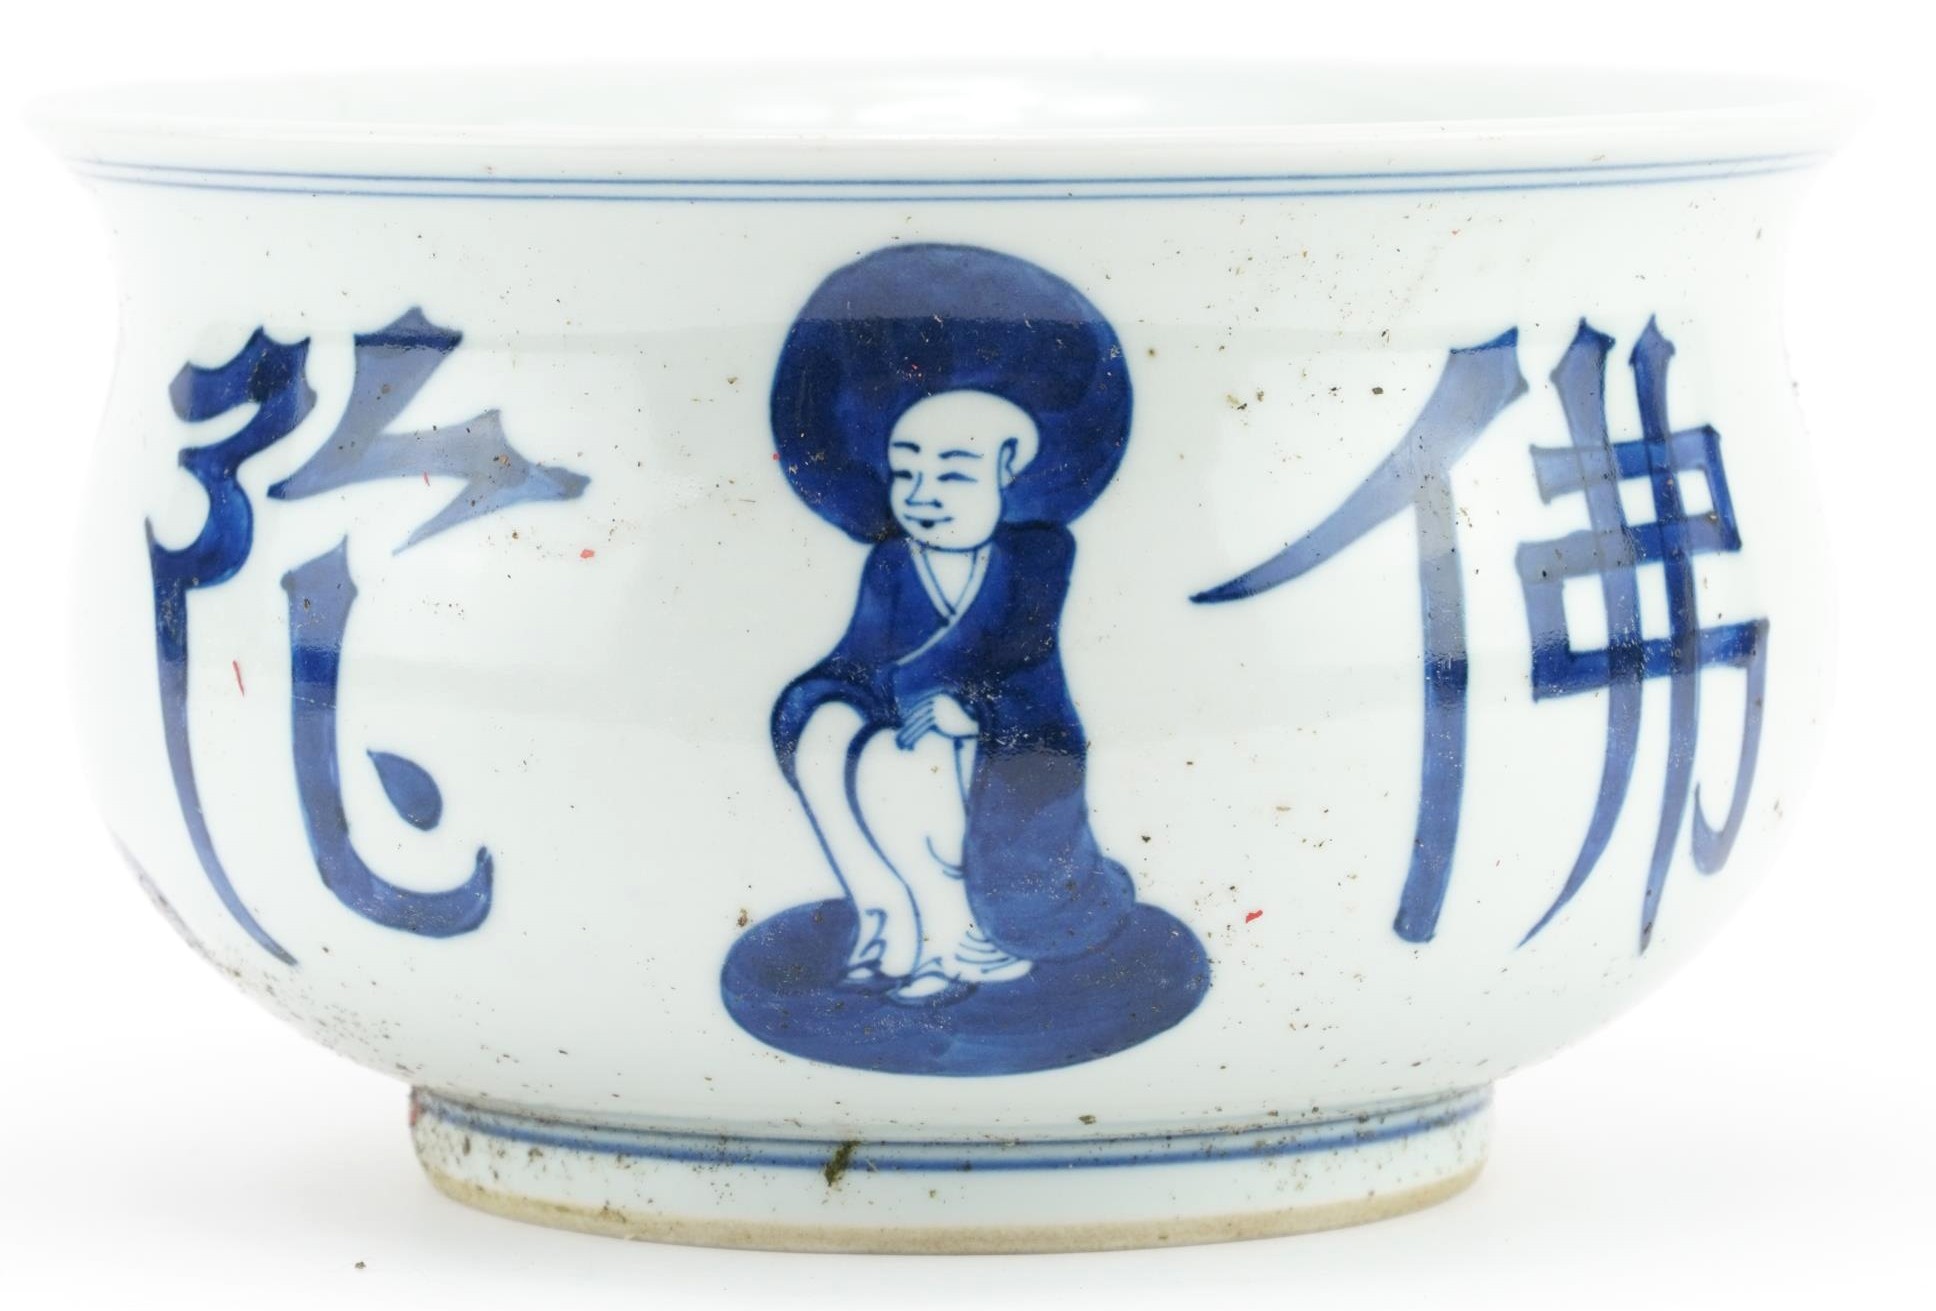 Chinese blue and white porcelain censer hand painted with monks and calligraphy, 20.5cm in diameter